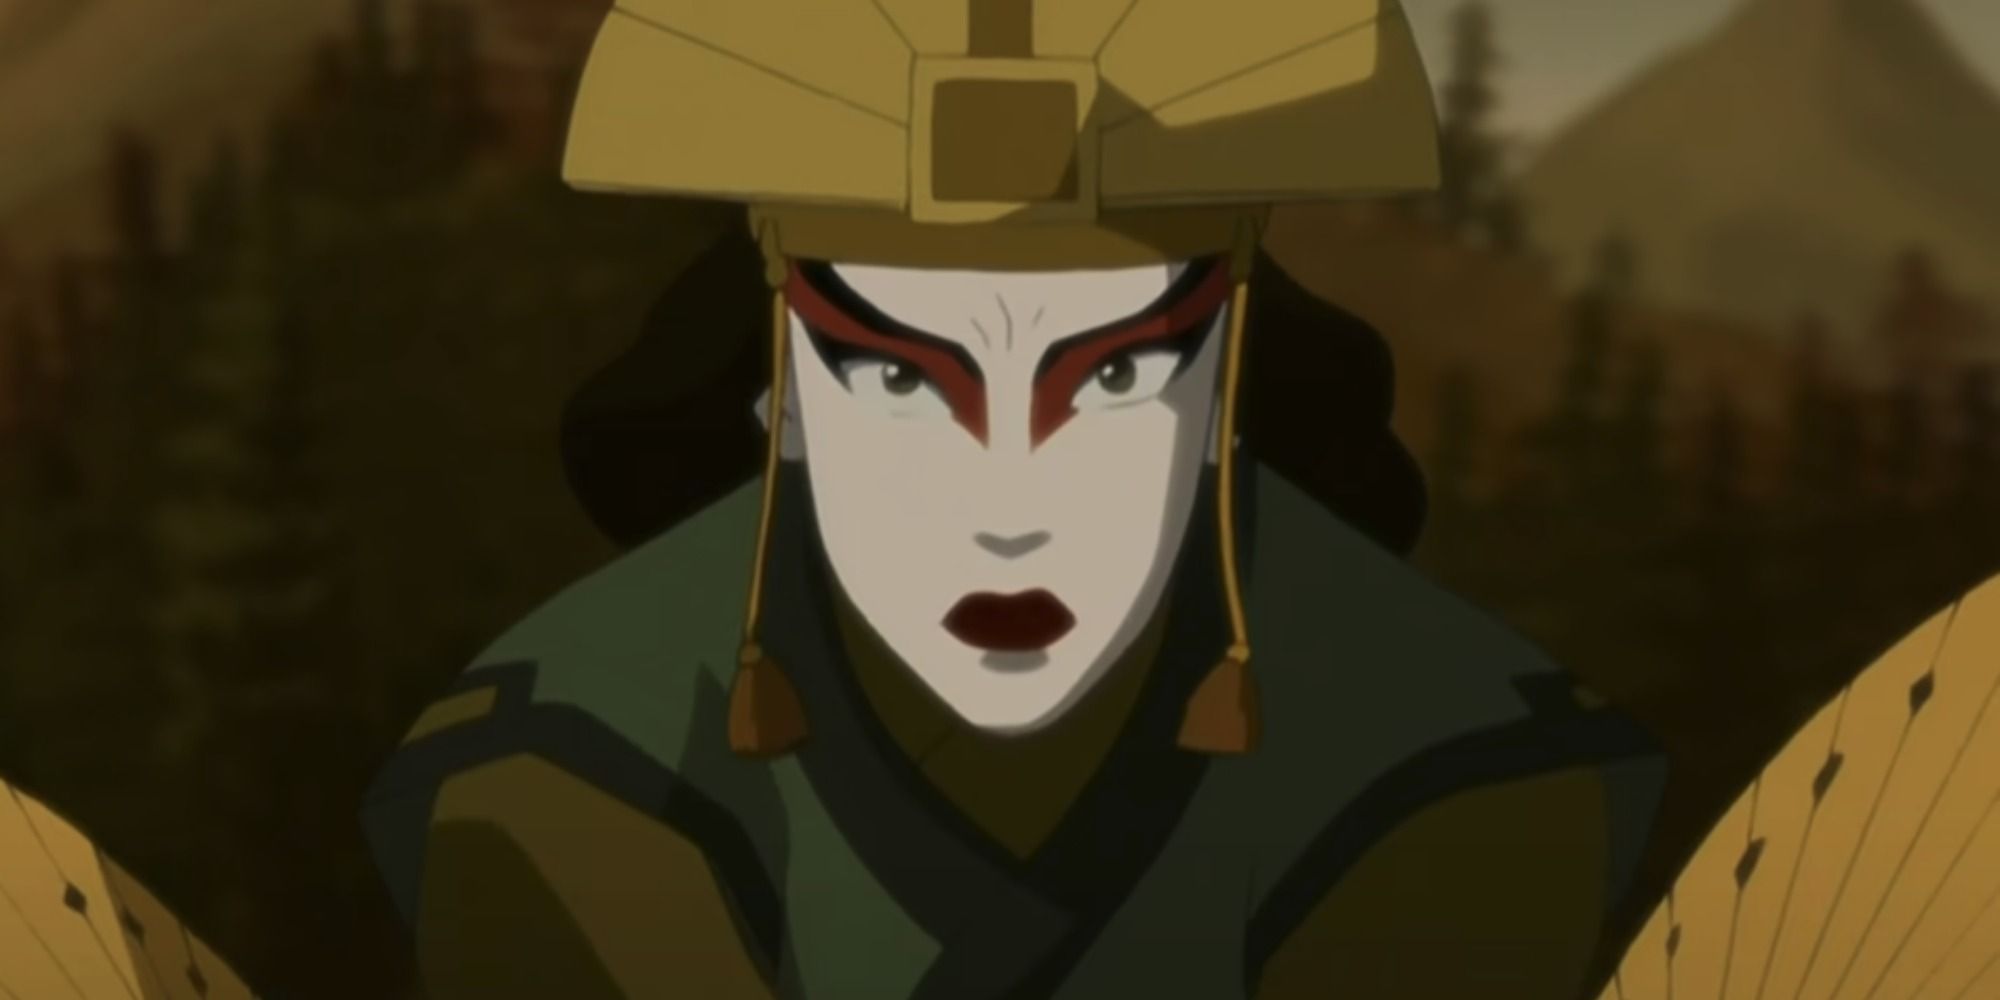 A profile screenshot of Avatar Kyoshi from Avatar: The Last Airbender